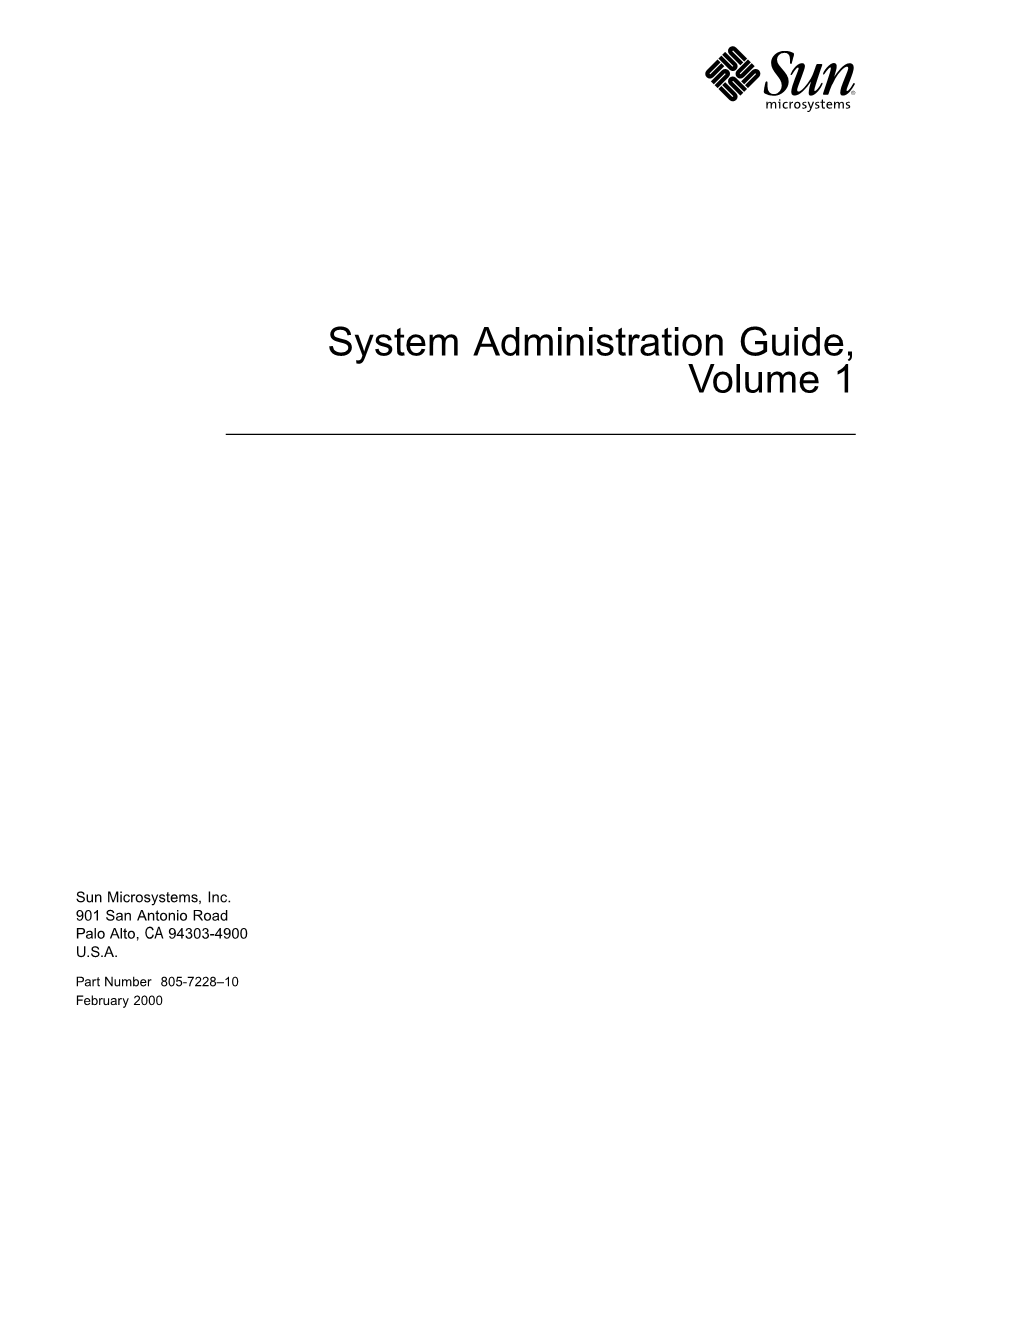 System Administration Guide, Volume 1